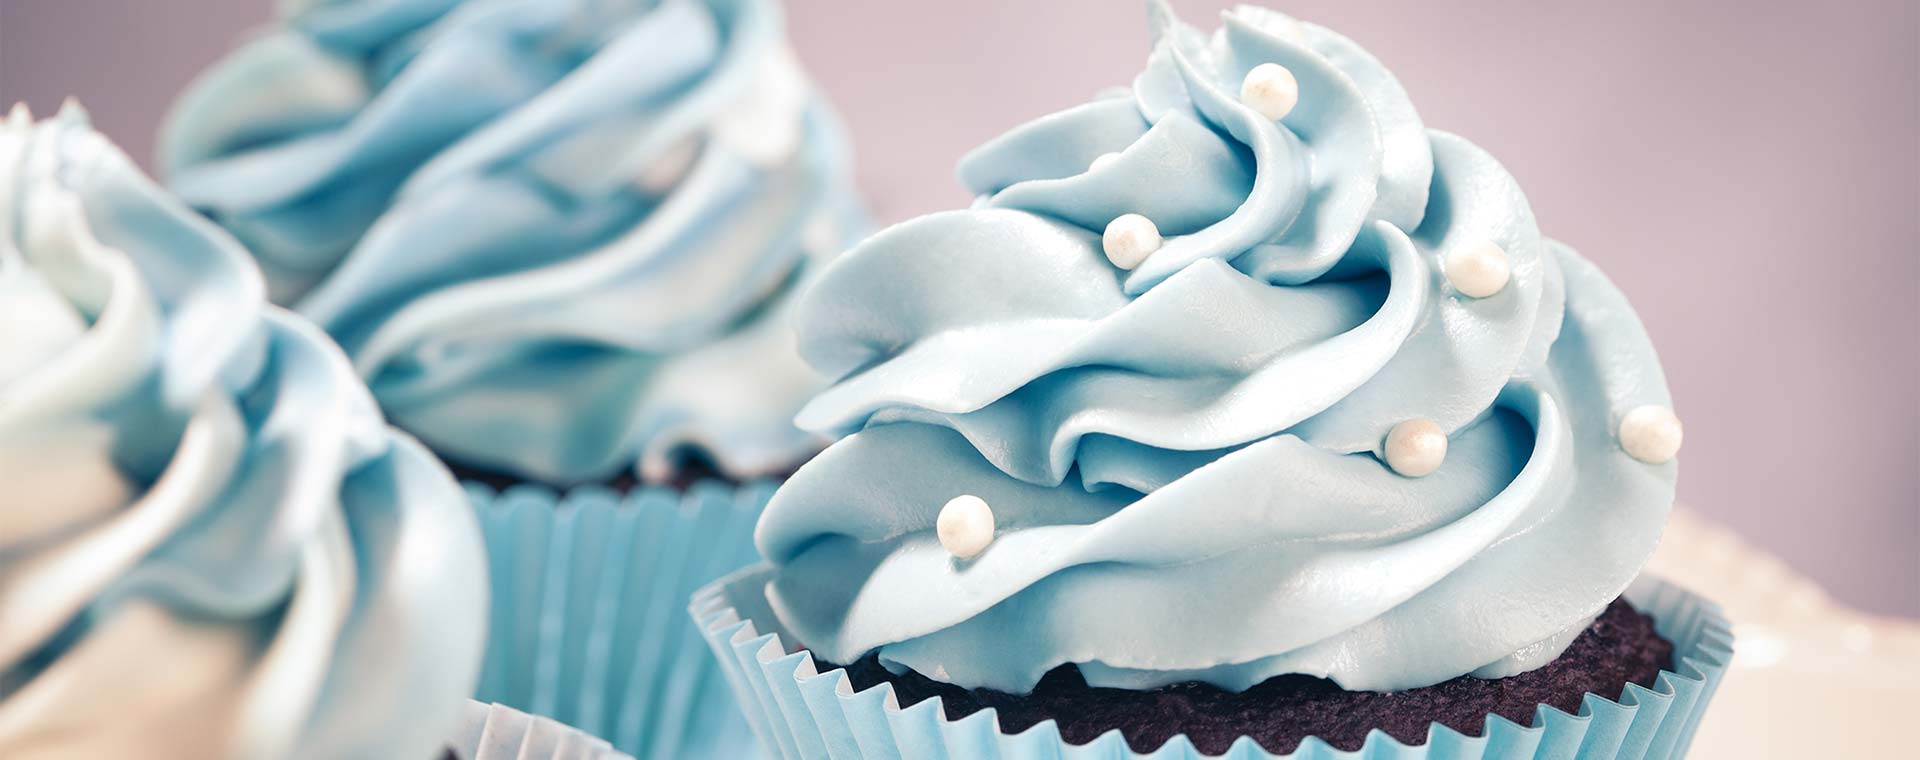 A close up of chocolate cupcakes with light blue icing, there are edible pearls decorating the cupcakes